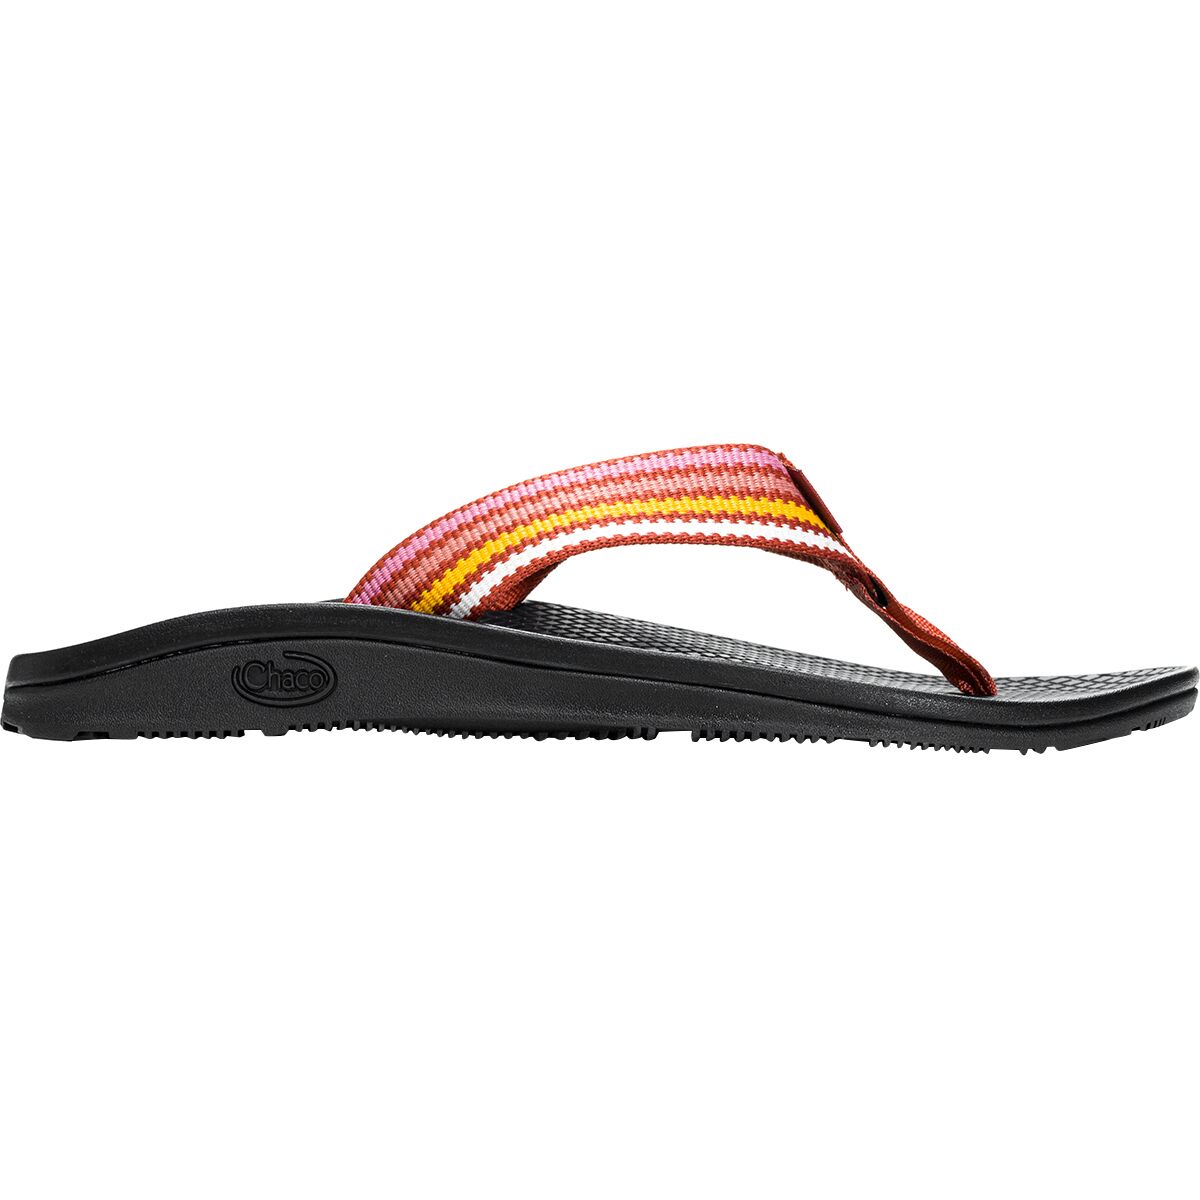 Chaco Classic Flip Flop -...